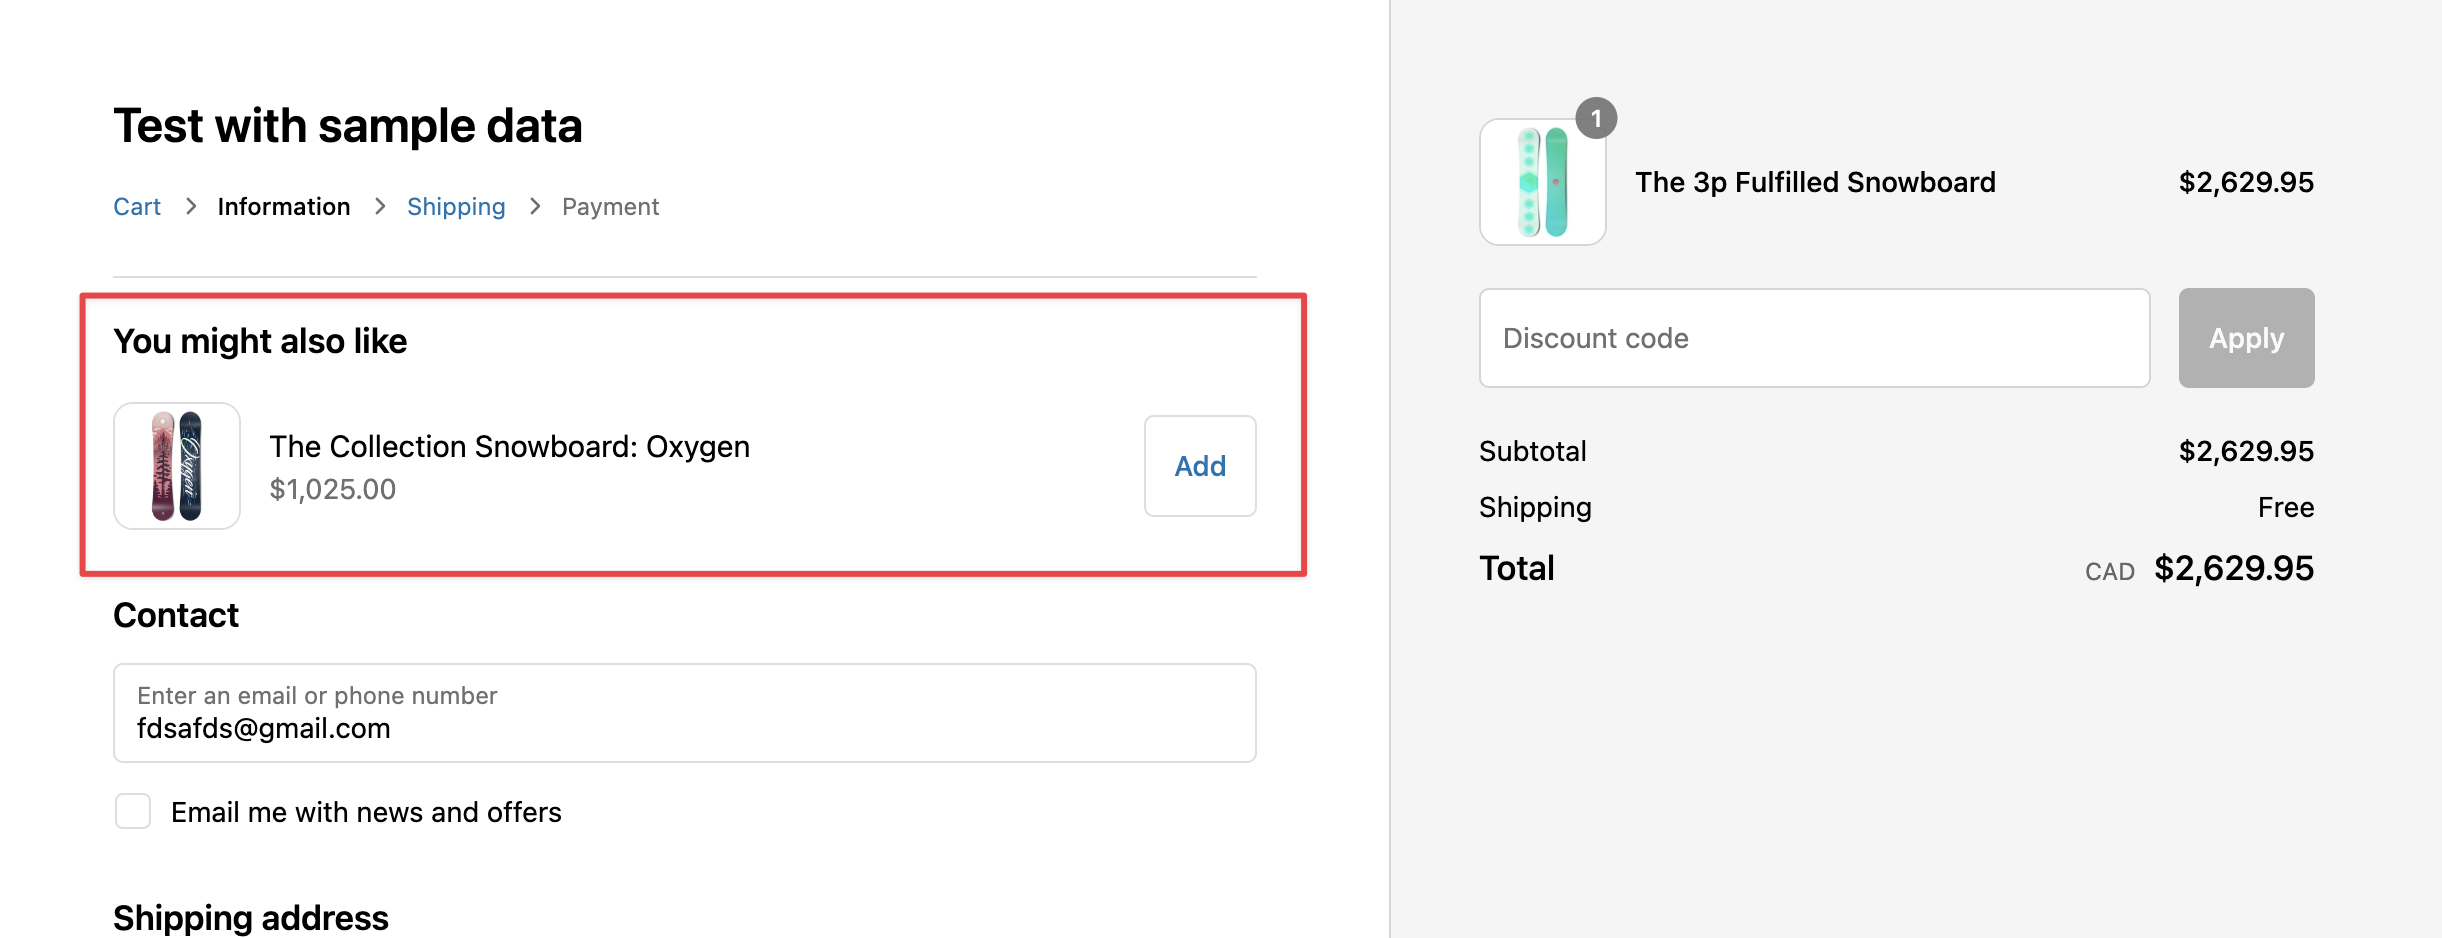 A screenshot of the pre-purchase app built in this tutorial using Shopify checkout UI extensions. A snowboard is being offered in the checkout. The product name and variant price are visible, along with an Add button available for buyers to add the item to their cart